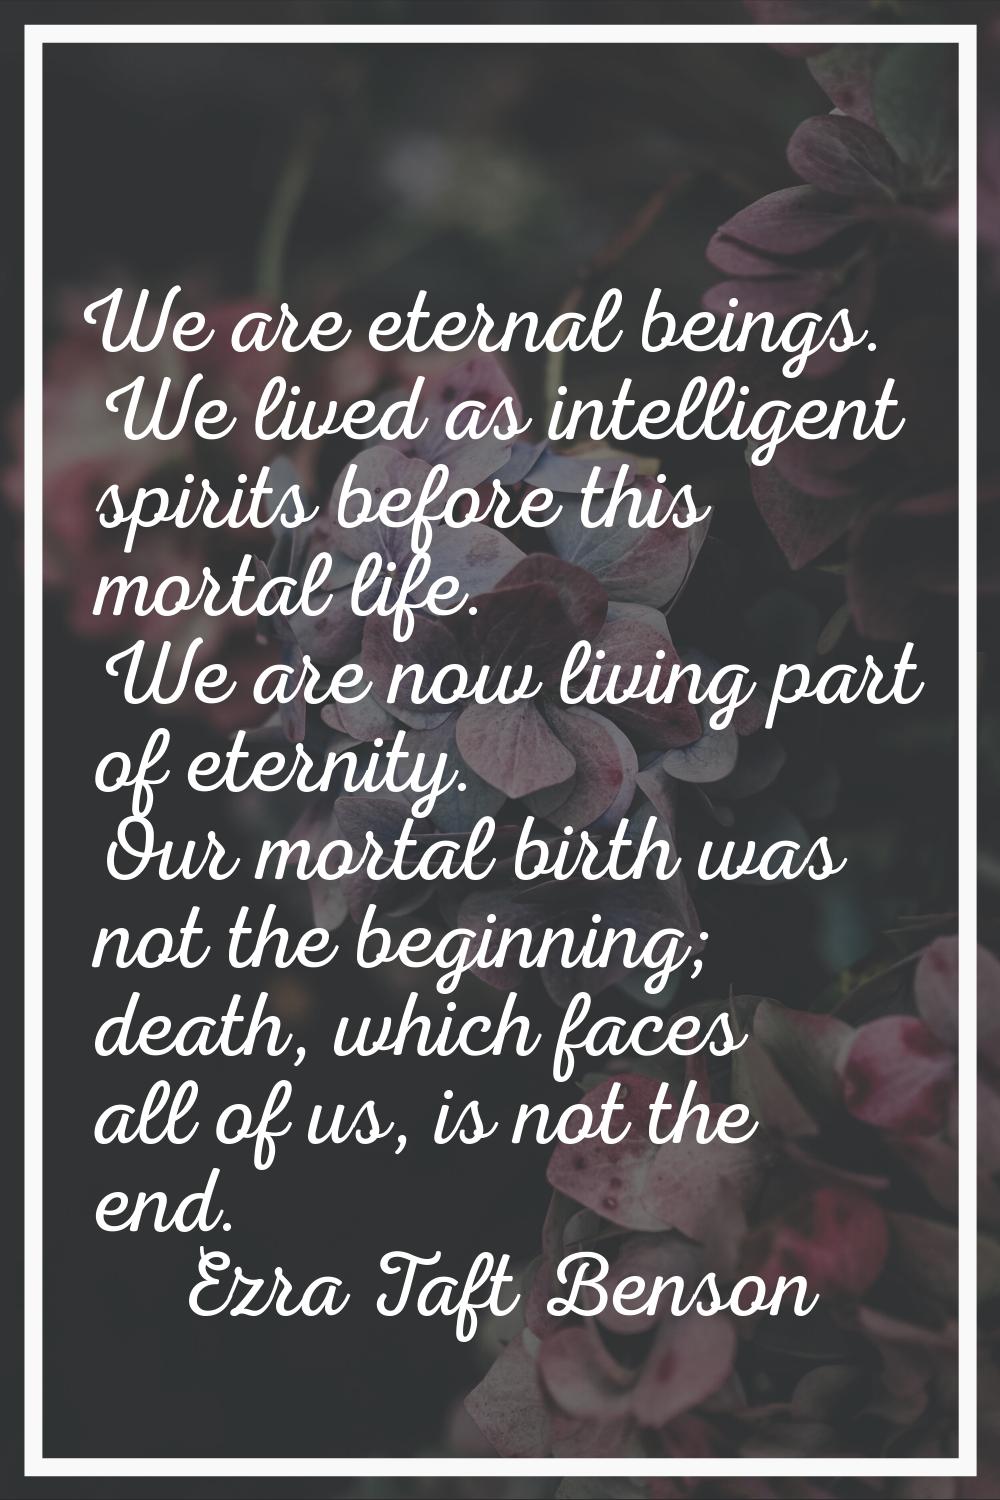 We are eternal beings. We lived as intelligent spirits before this mortal life. We are now living p